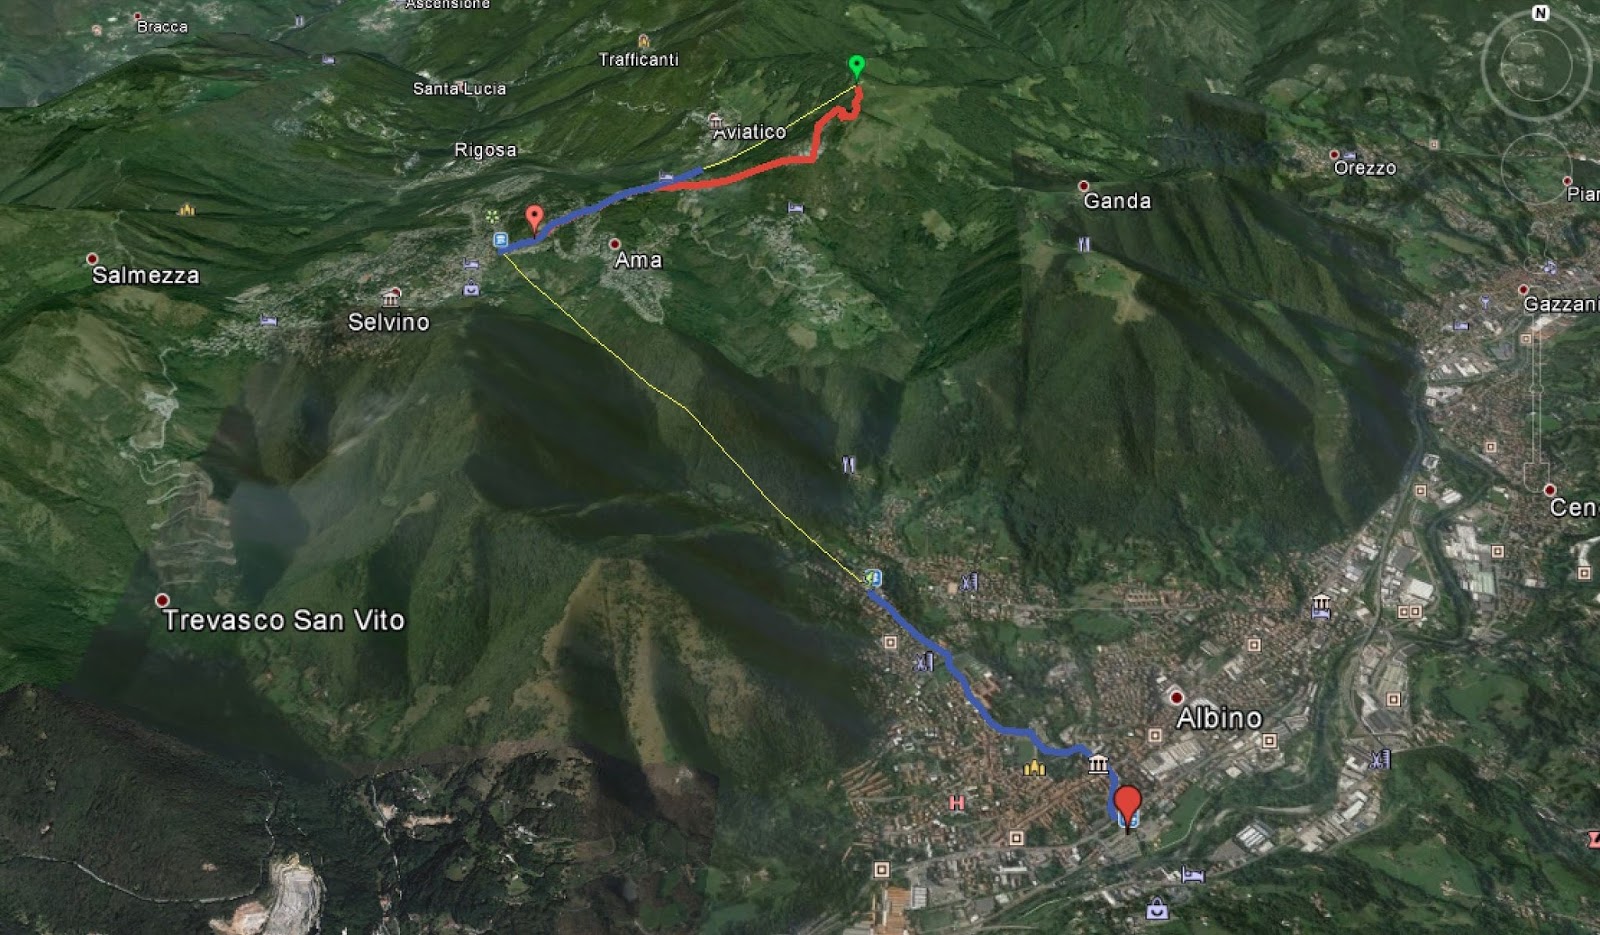 Route we took. Yellow is funivia or cabinovia. Blue is walking on roads. Red is hiking.